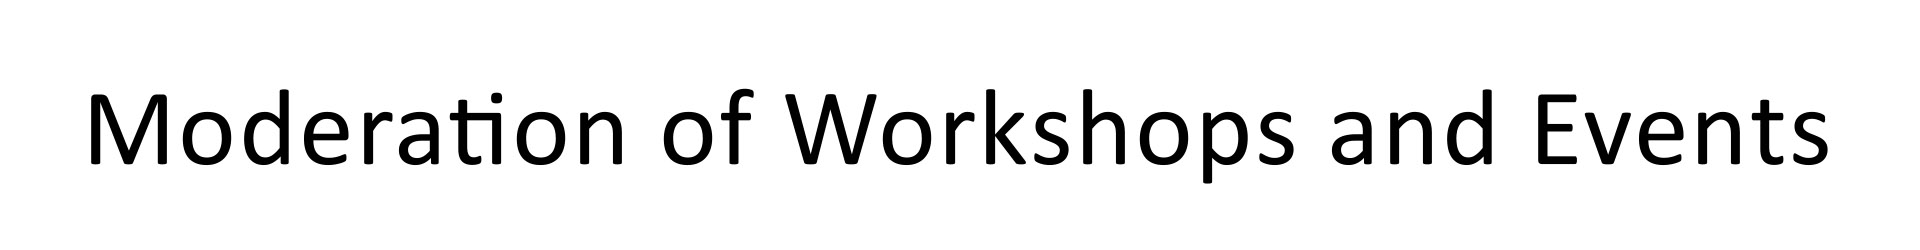 ENG_03_Moderation-of-Workshops-and-Events